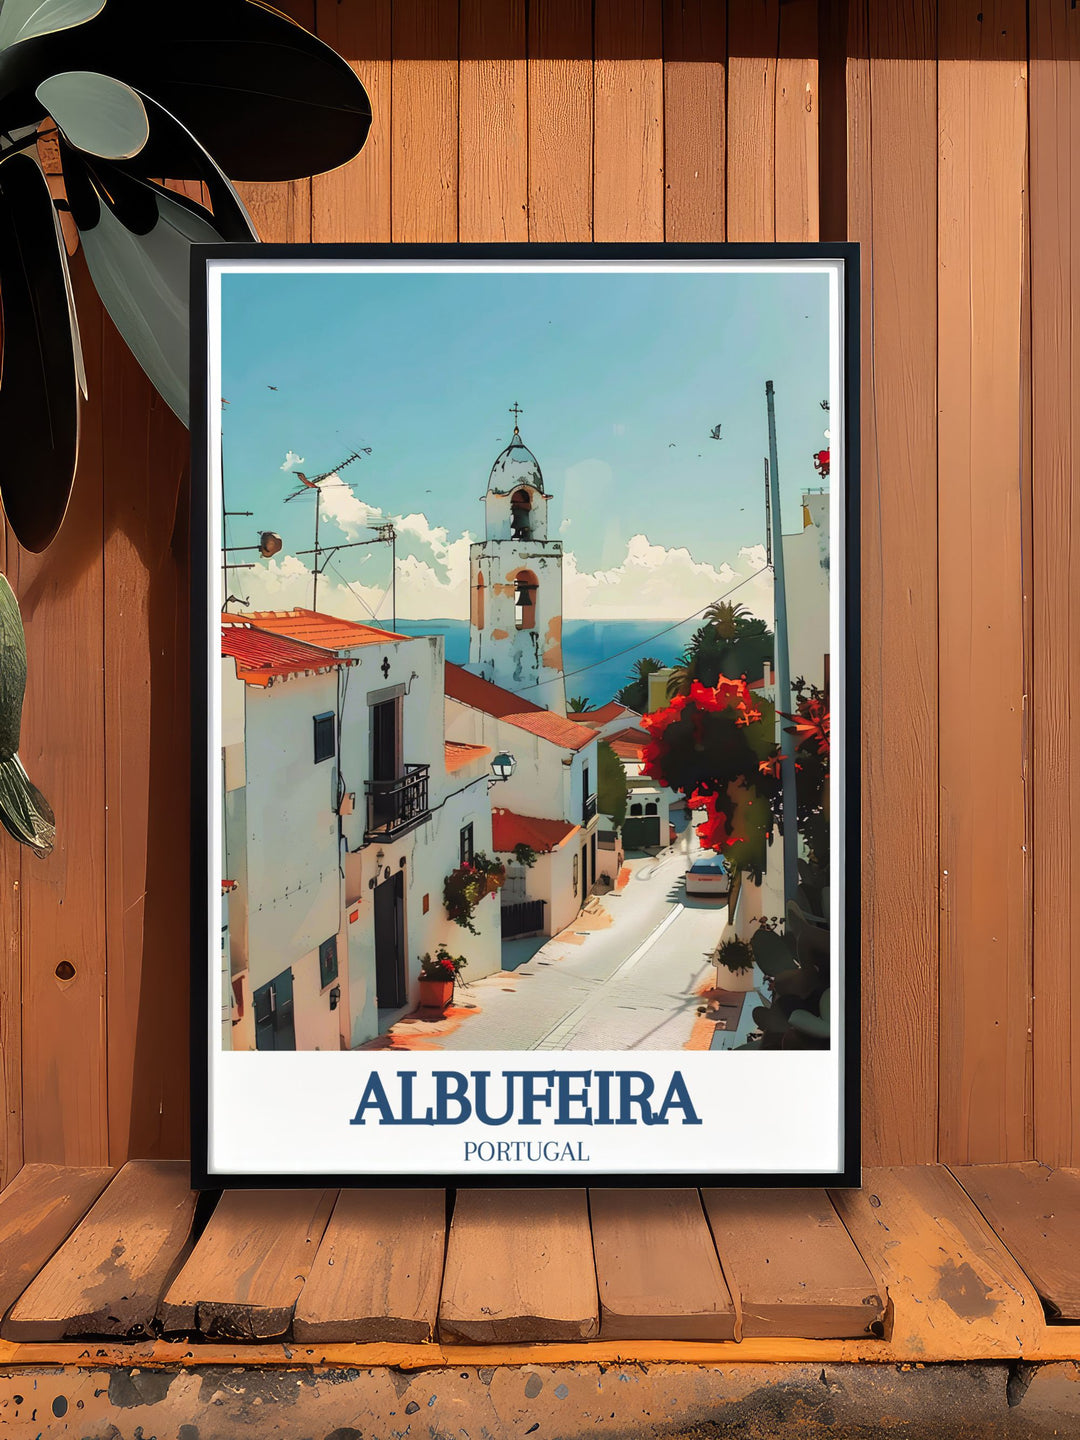 Retro travel poster of Albufeira, showcasing the timeless beauty of St Anna Church, perfect for those who appreciate historic landmarks and Portuguese culture.